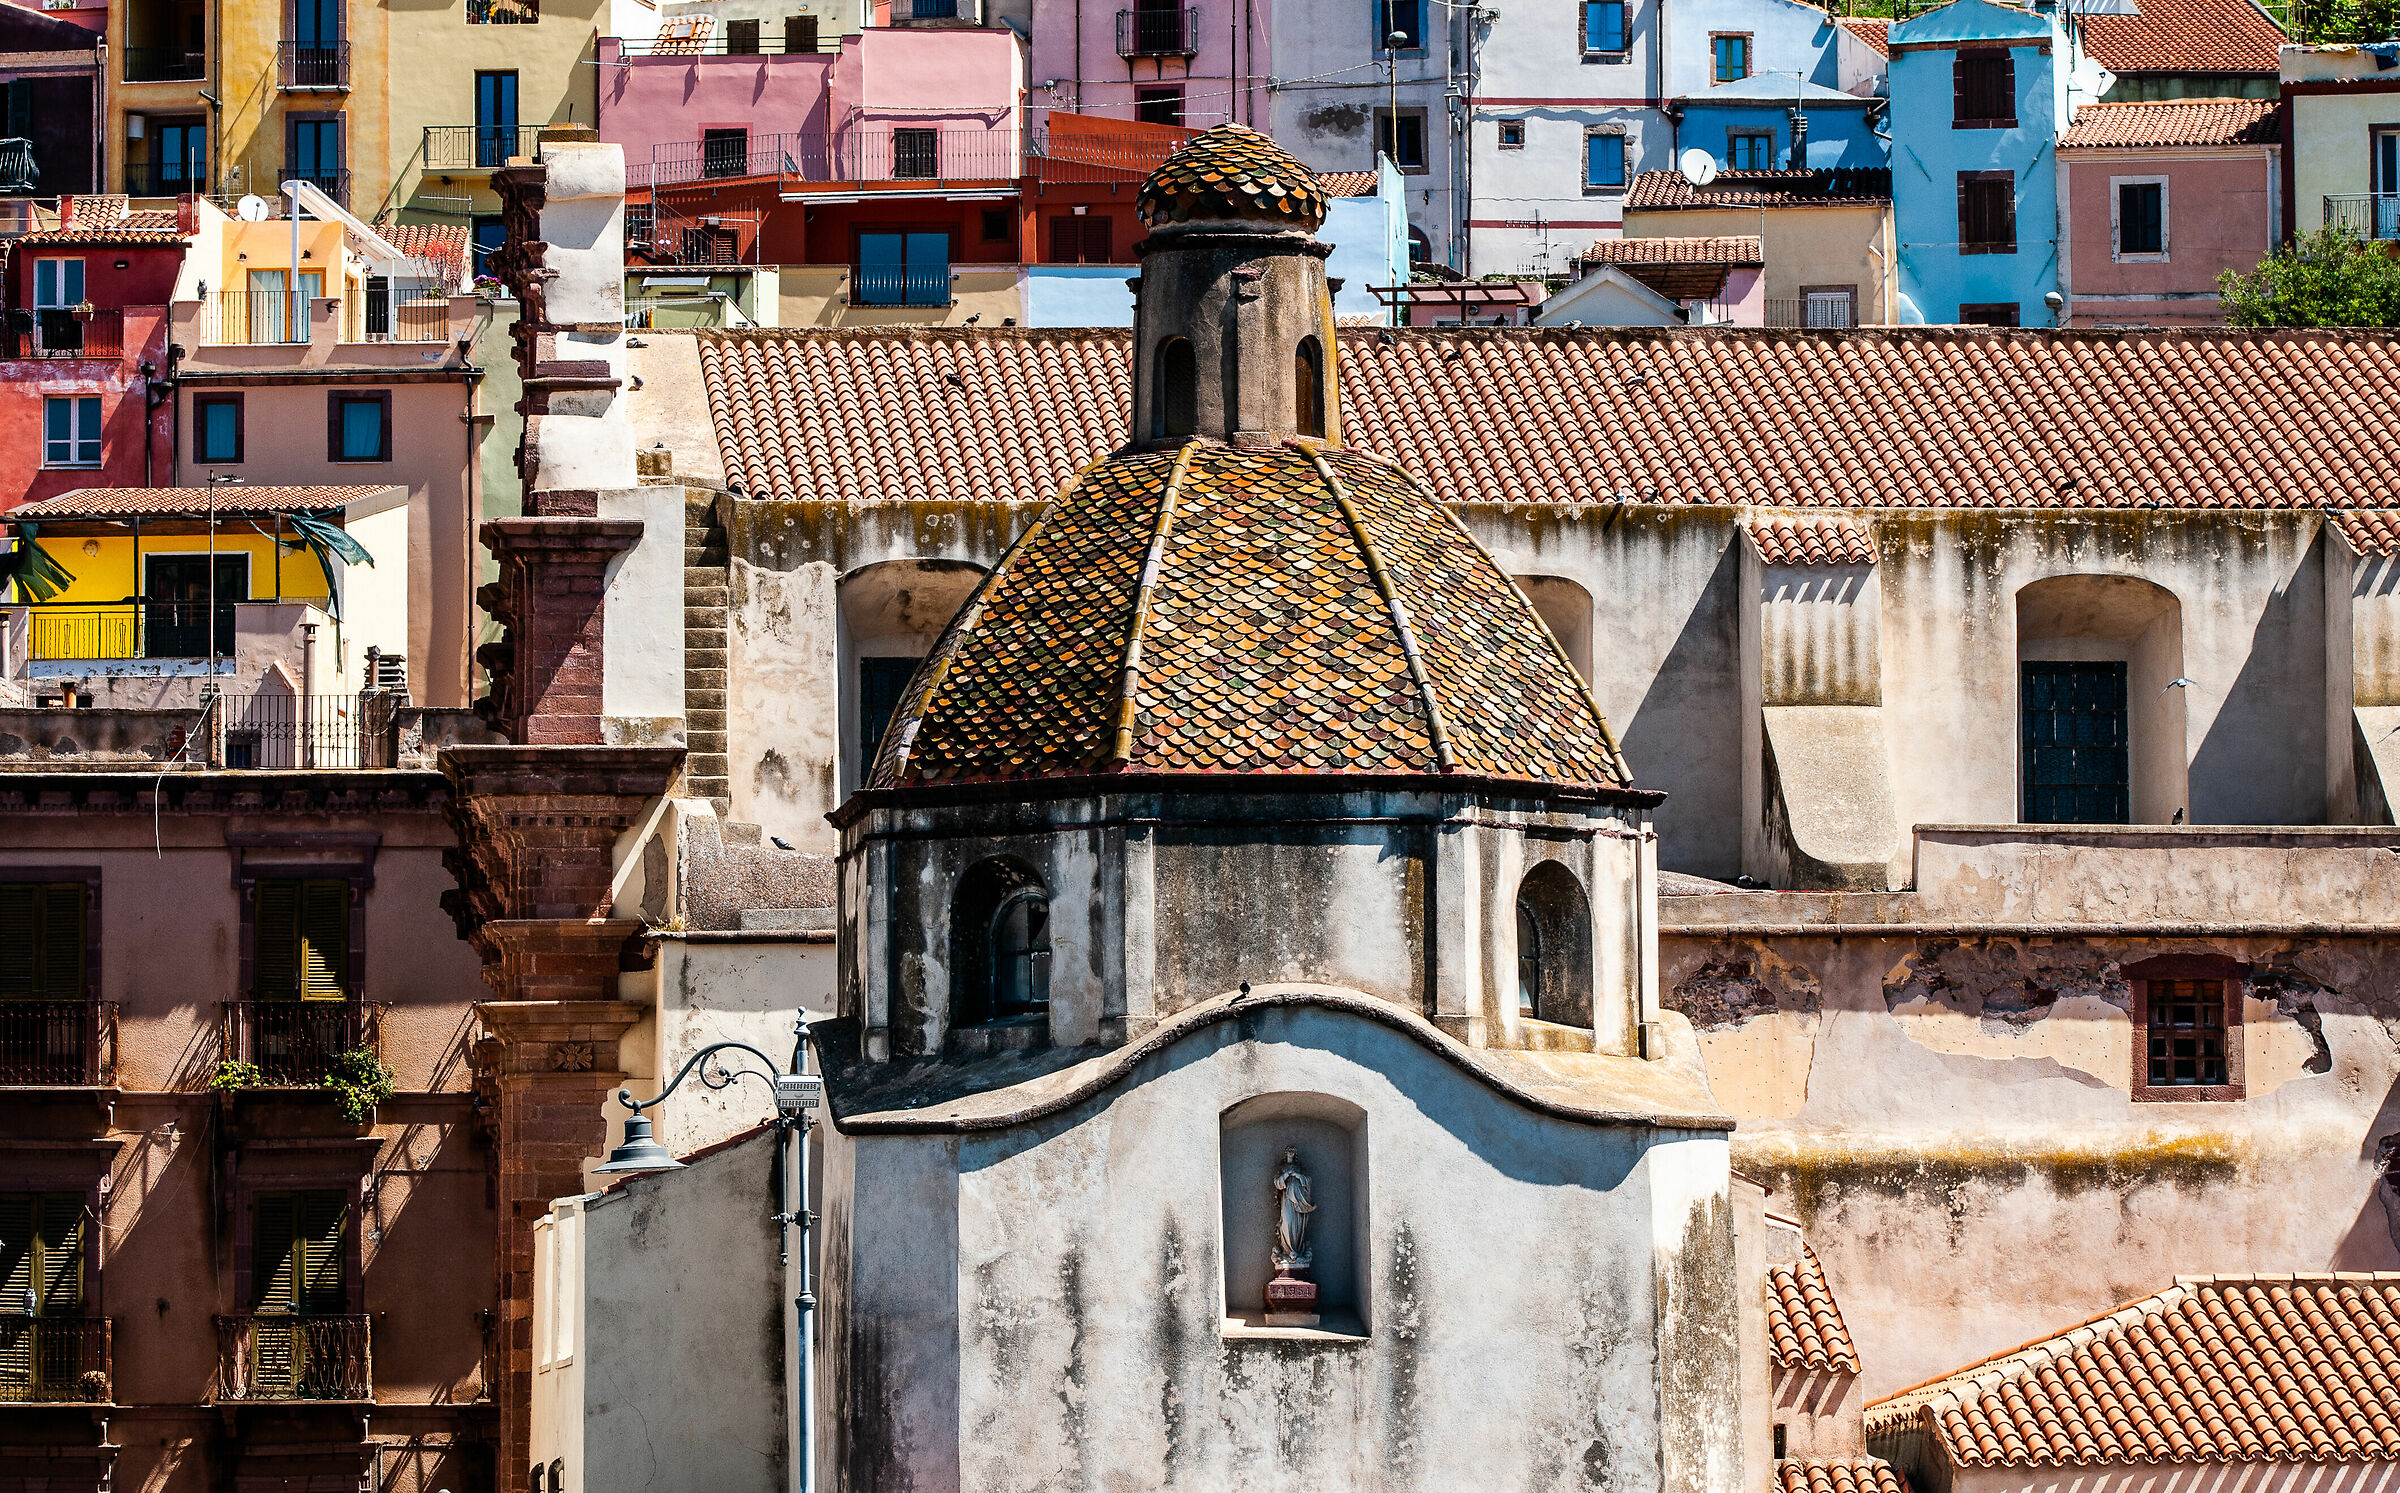 Houses, roofs and bell towers...